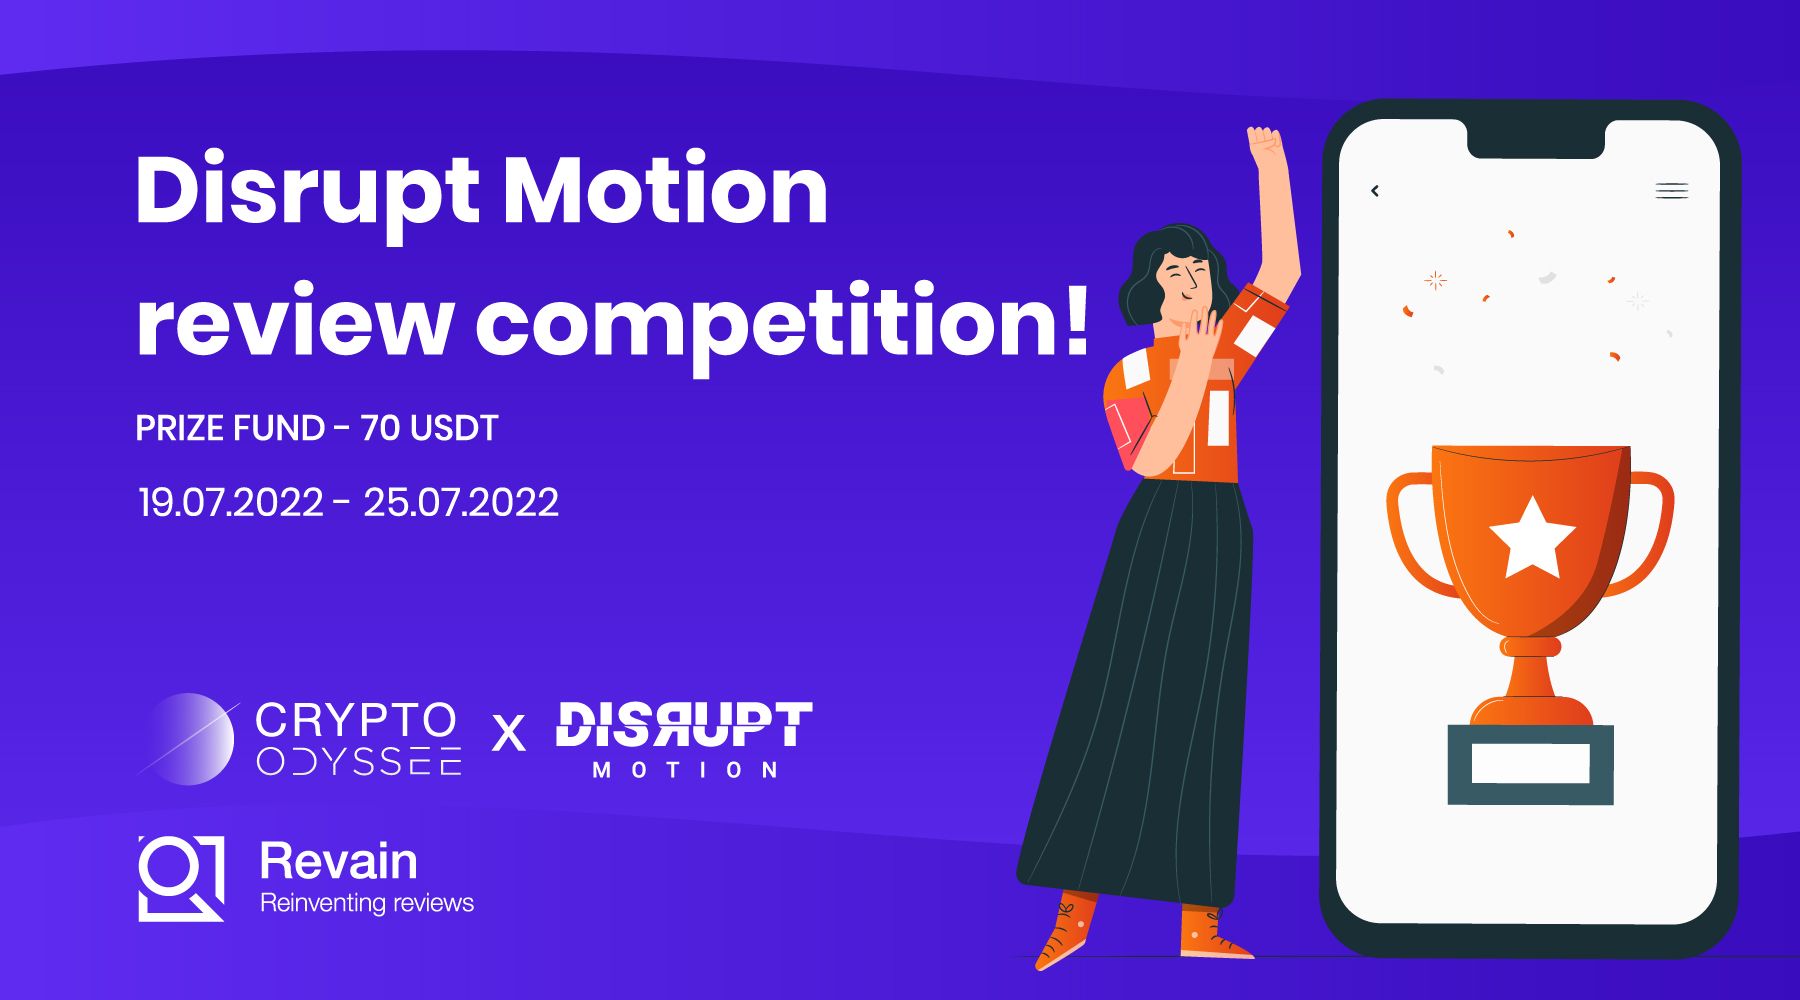 Disrupt Motion & Revain start a new competition!